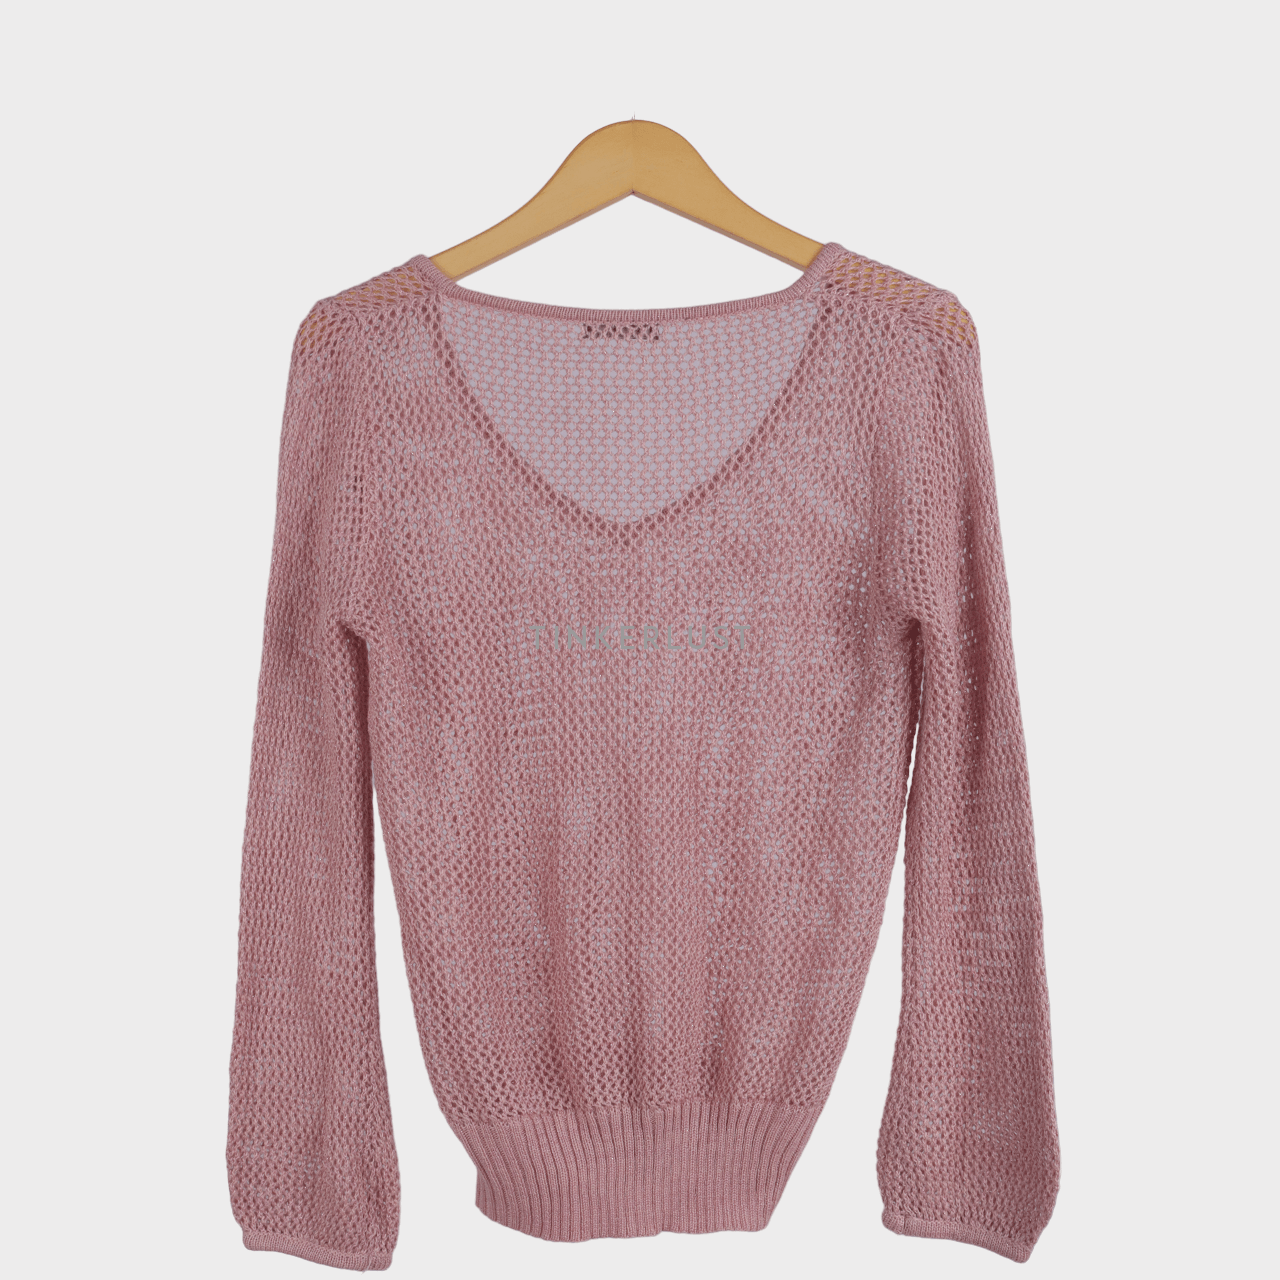 bYSI Dusty Pink Blouse